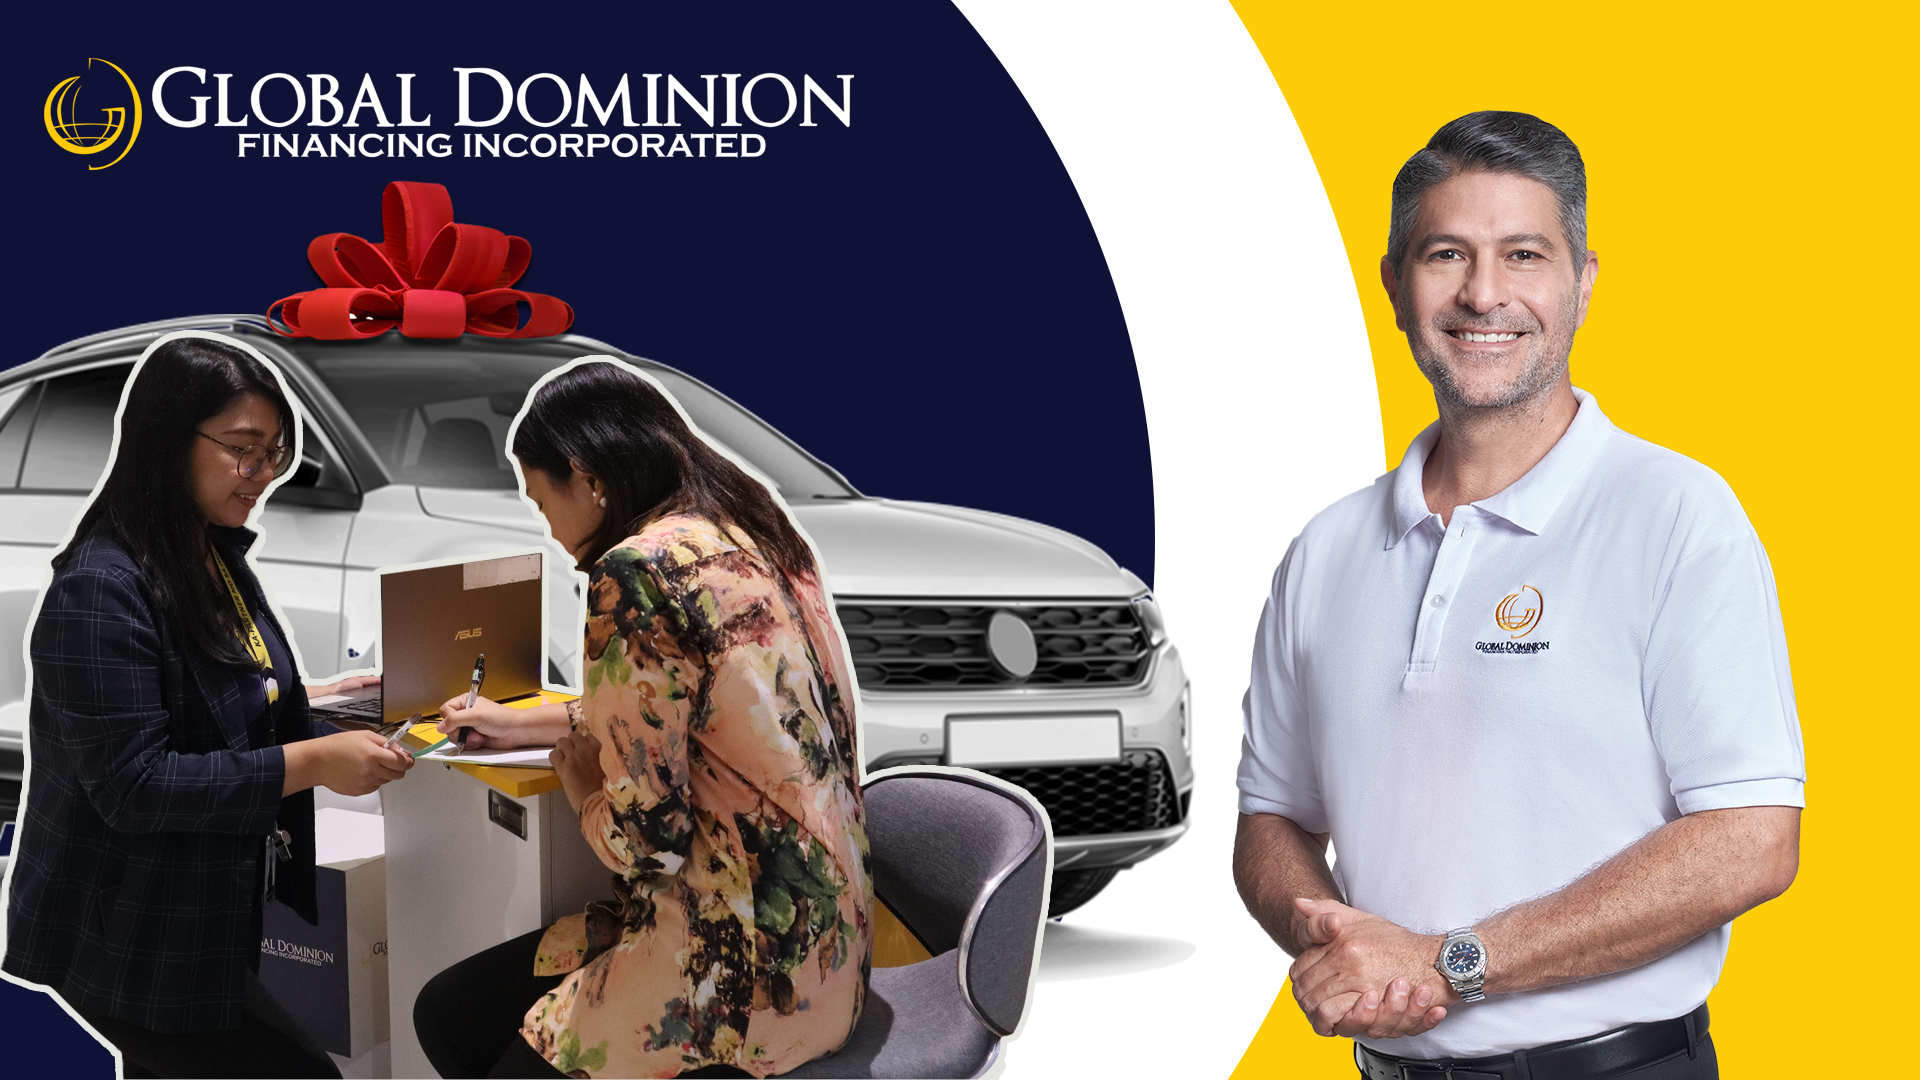 Rolling up to the holiday season with your dream car thanks to Global Dominion Financing Inc.